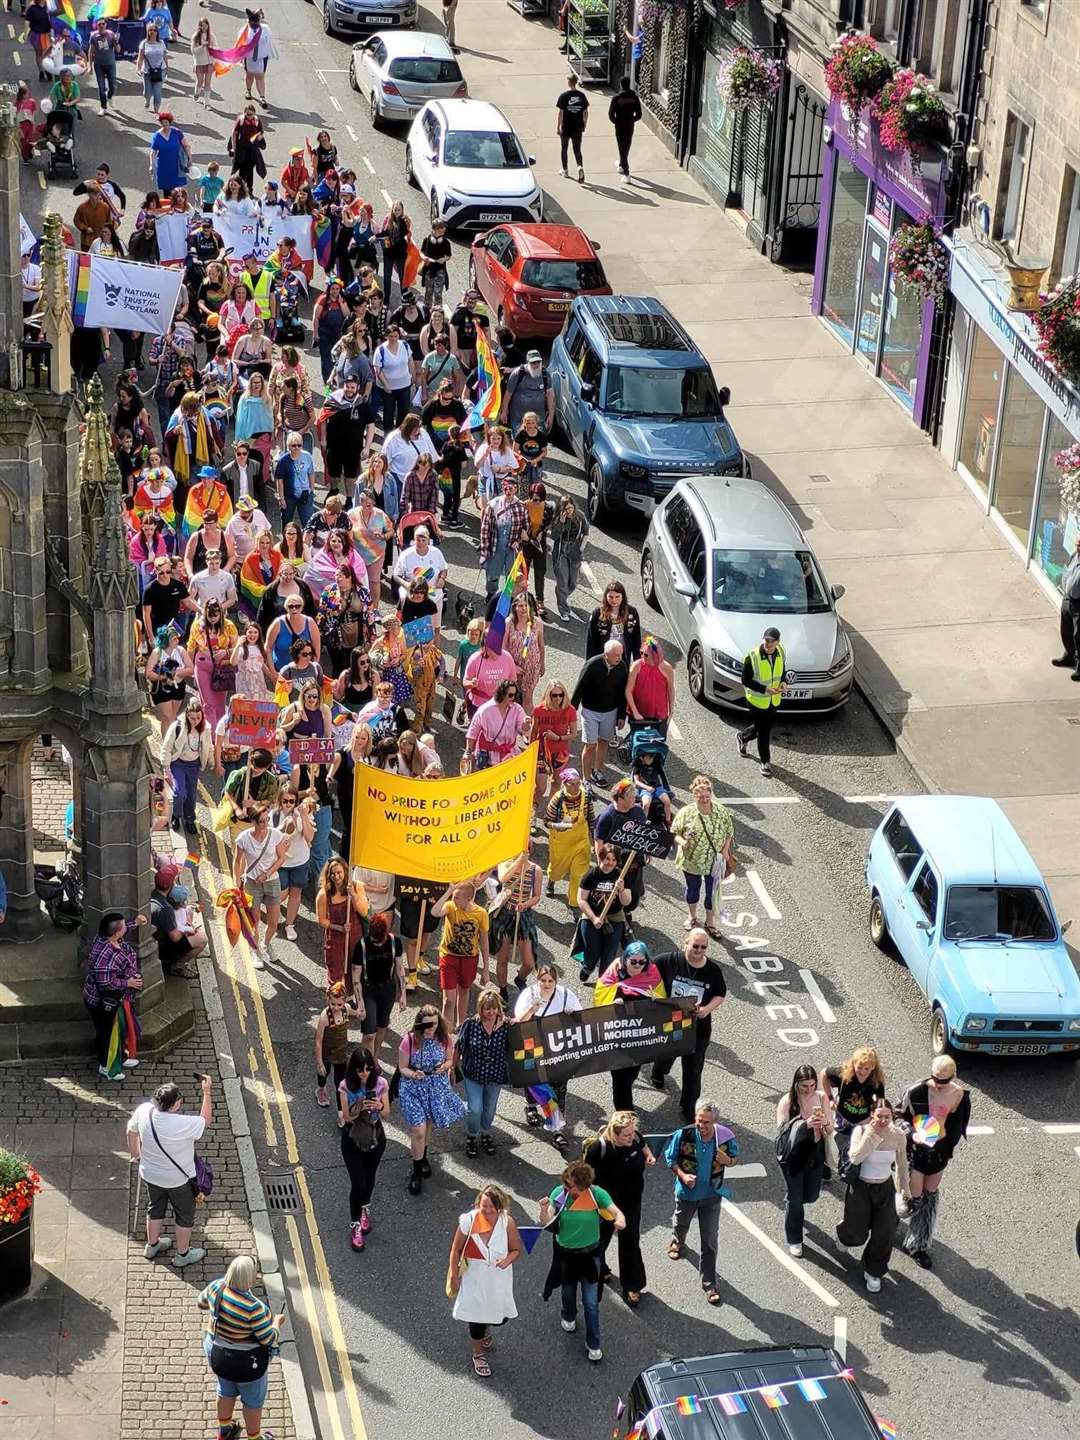 Hundreds took part in the Pride in Moray march on Saturday afternoon.